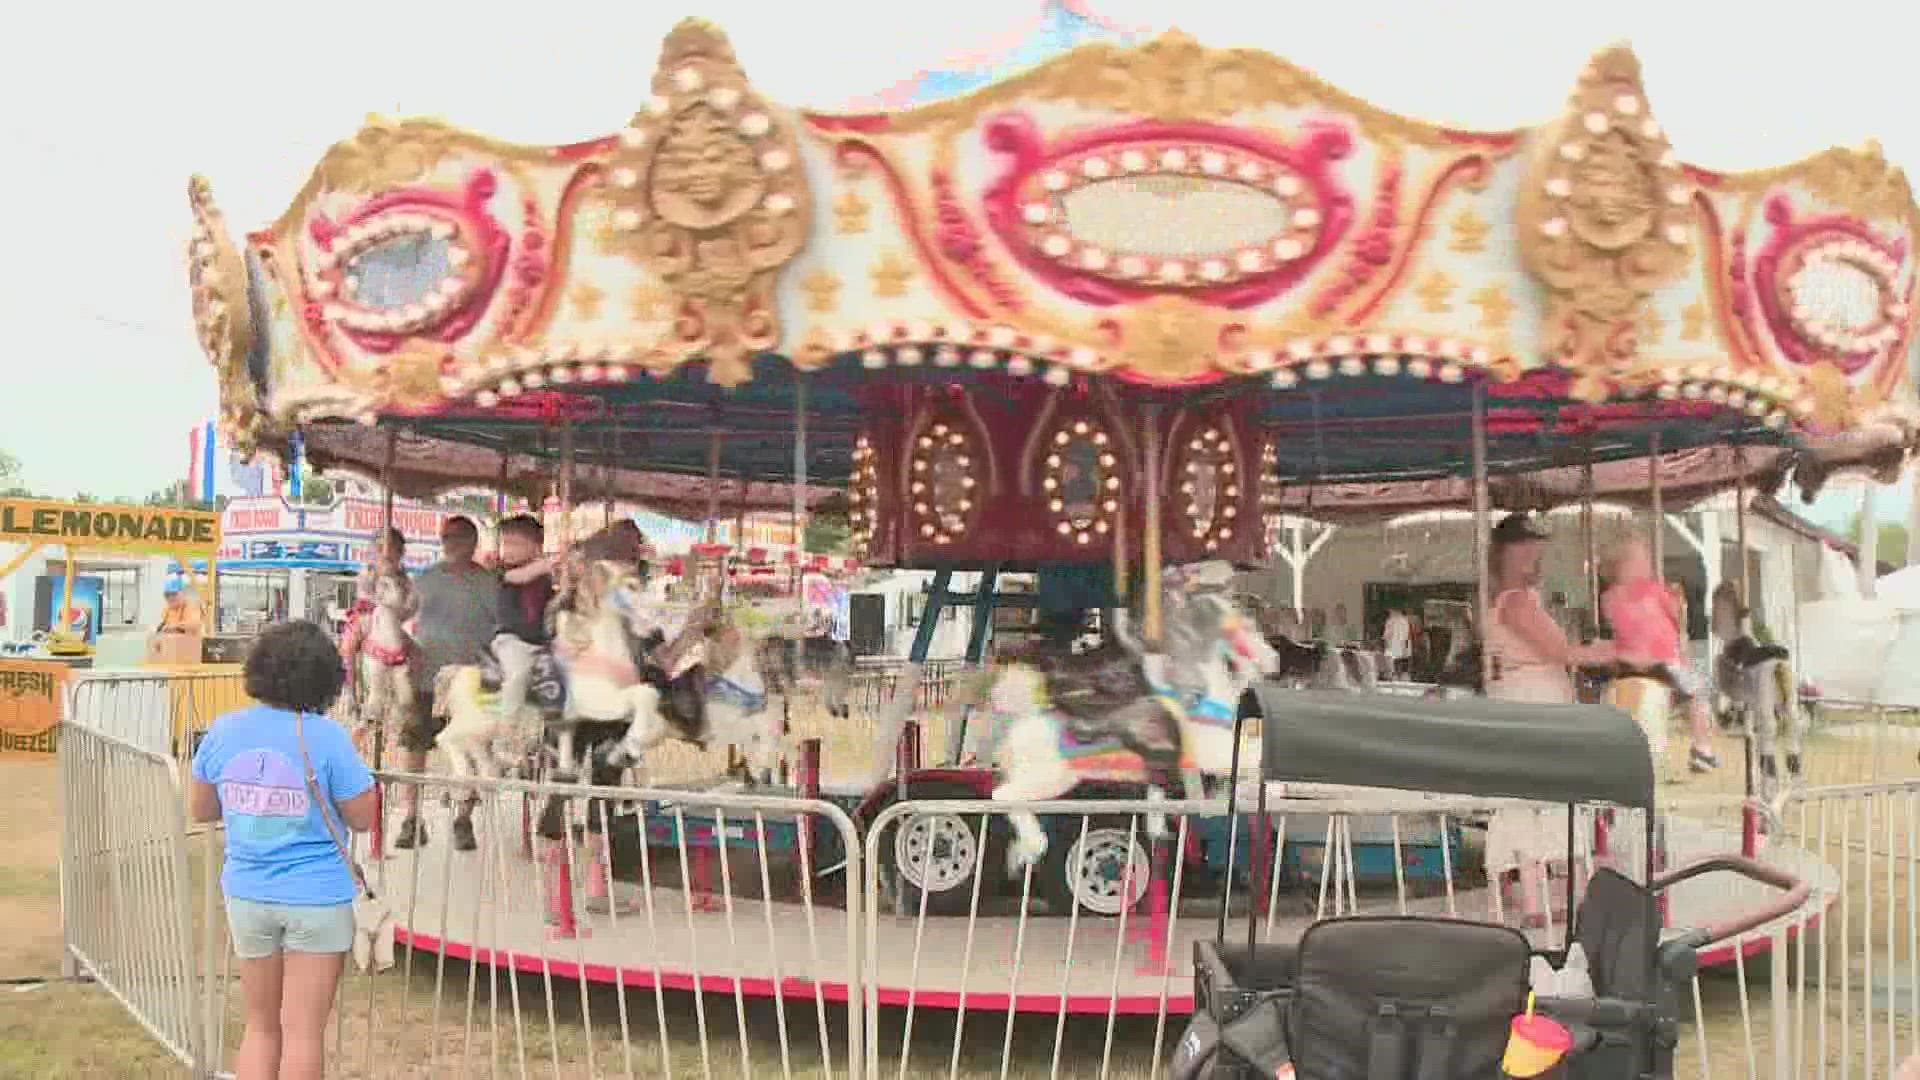 The Topsham Fair will be happening through the weekend.